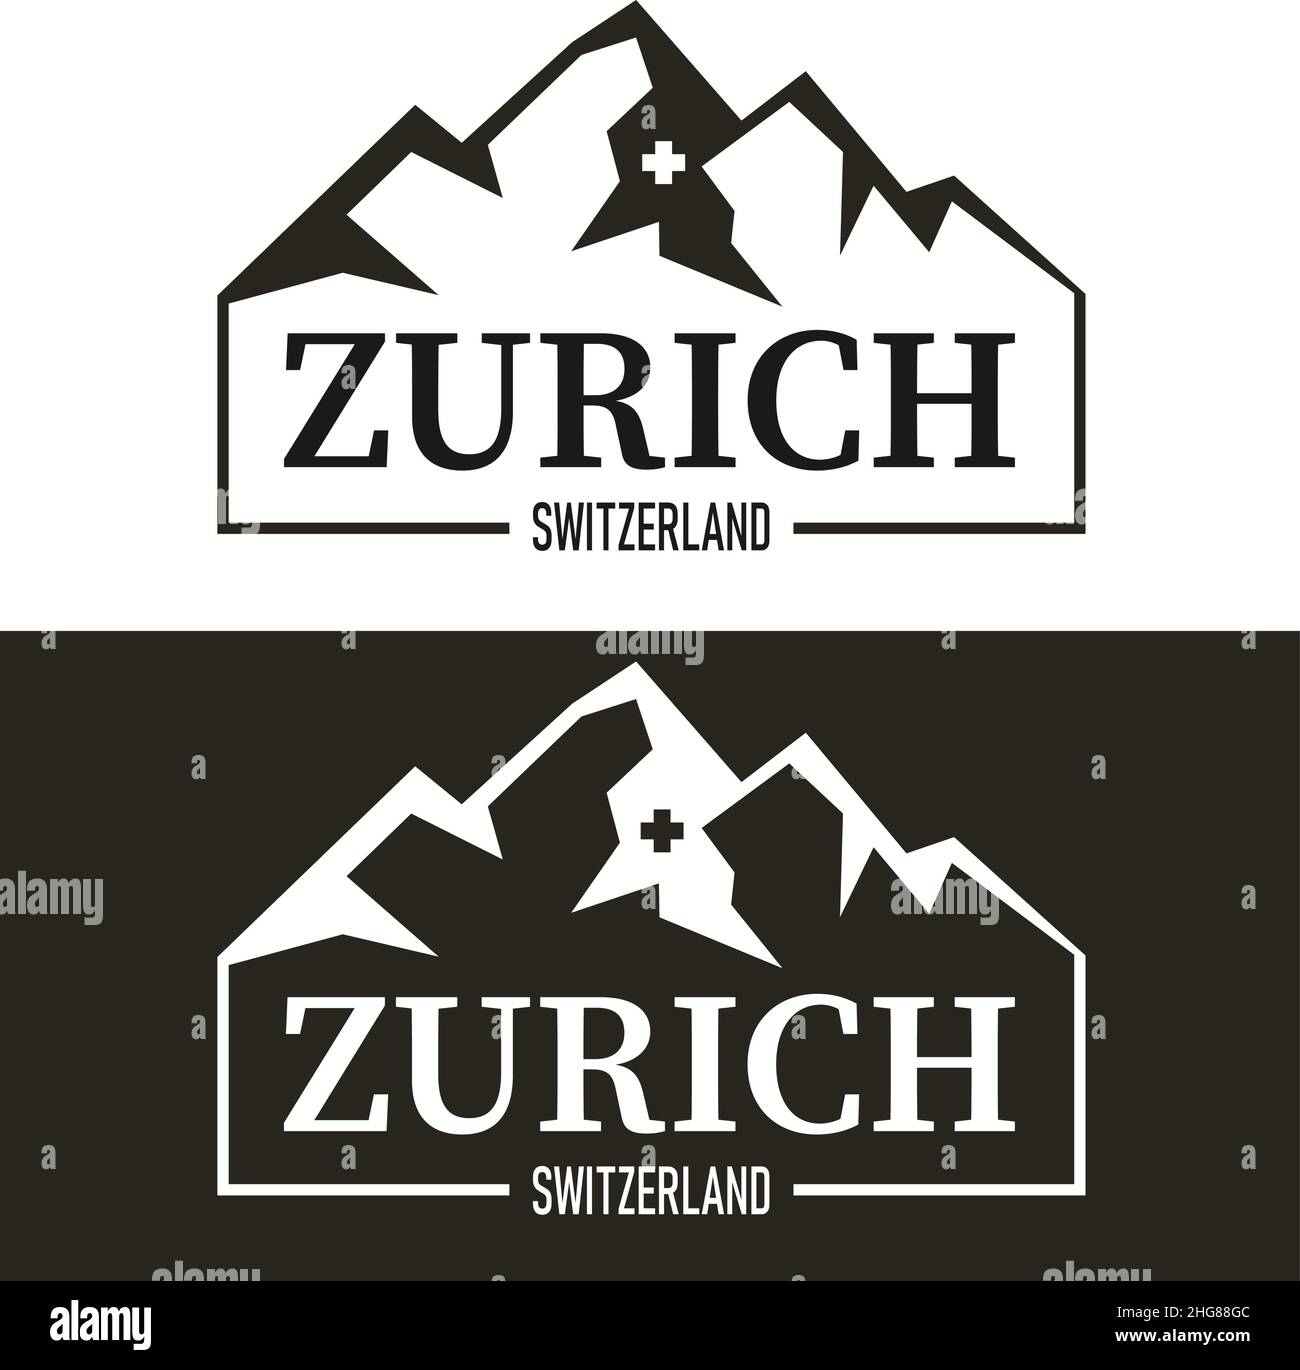 Zurich Switzerland Vector Illustration Background. Travel to zurich Switzerland. Vector Illustration in Colored Style. Stock Vector